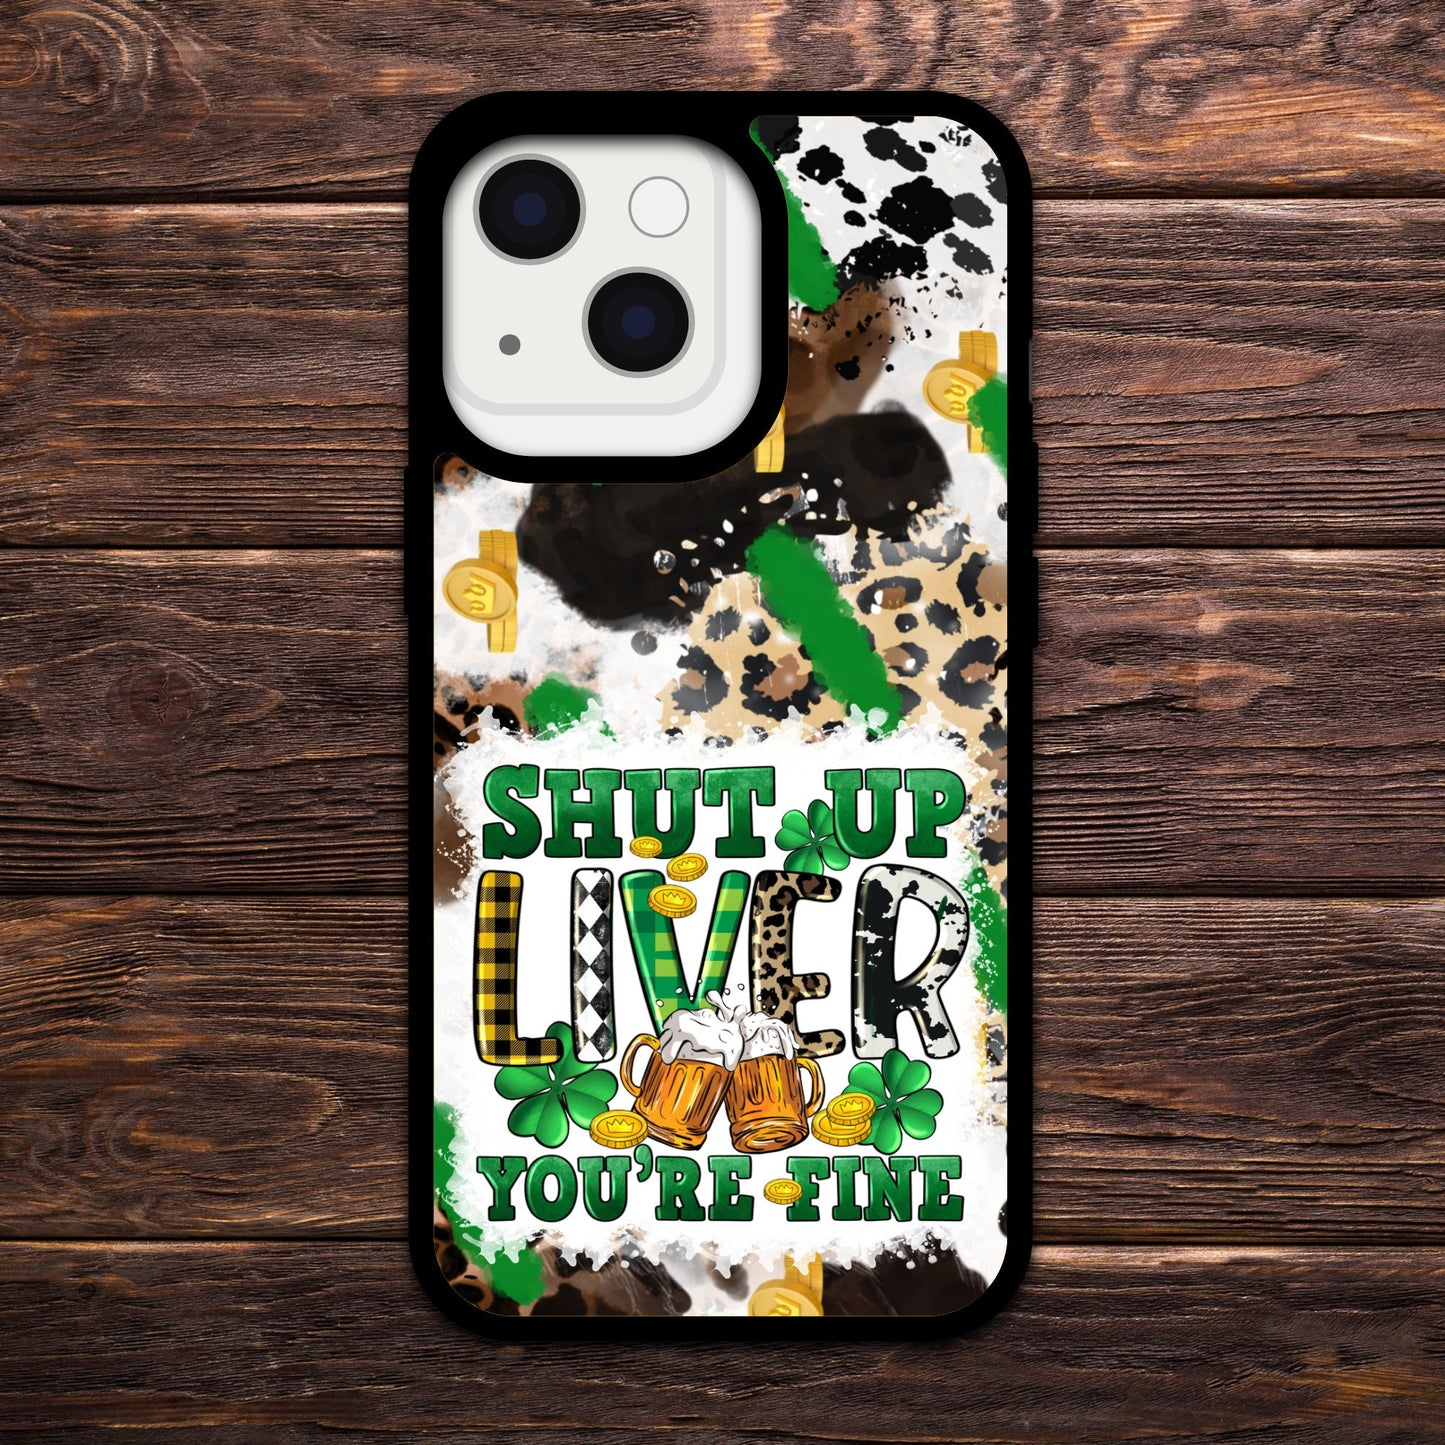 SHUT UP LIVER/St. Patrick's Design Phone Case/ Cover/ Cell Phone Cases Black Edge Cover /Compatible with Iphone and Samsung